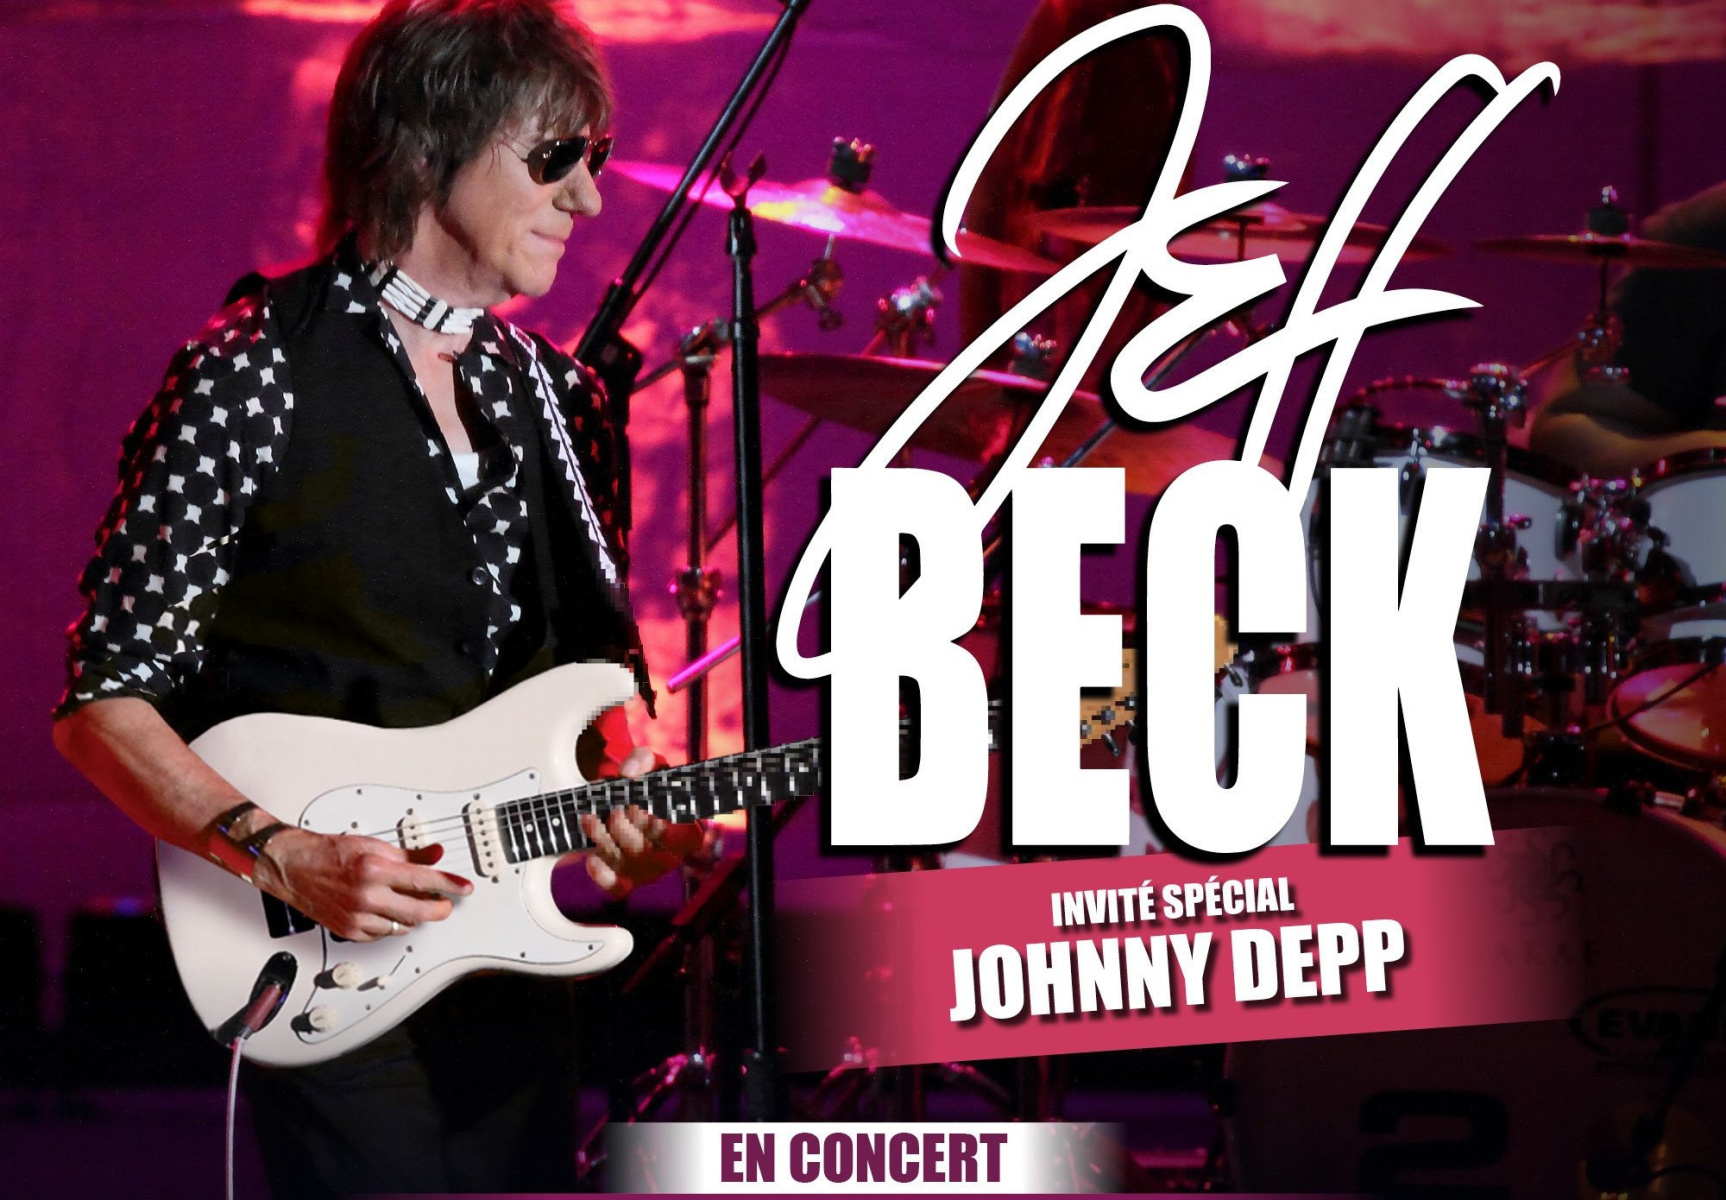 Jeff Beck live in July 2022 at Paris Olympia with Johnny Depp as a